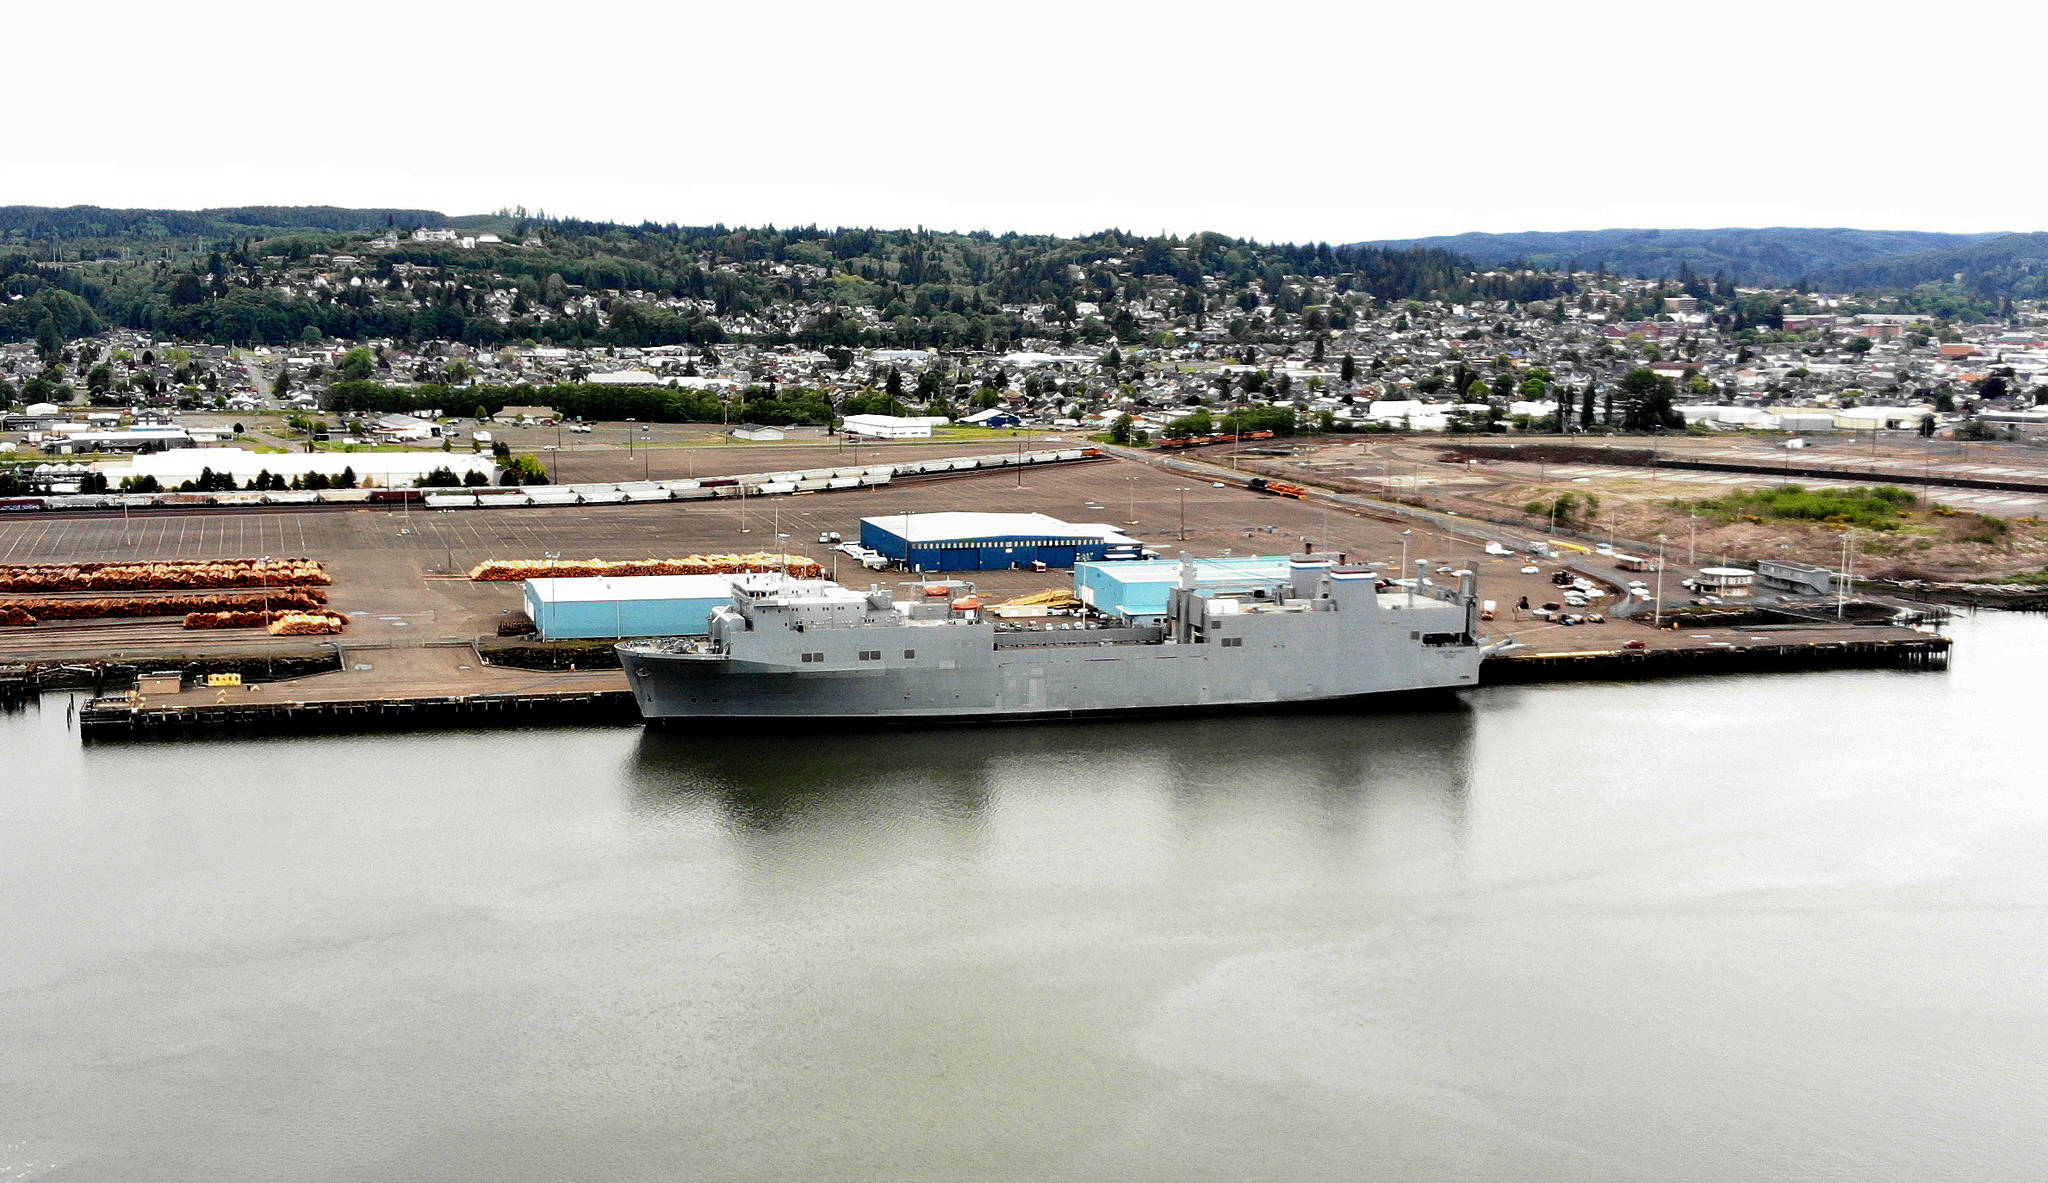 DAVE HAVILAND/THE DAILY WORLD 
The Cape Orlando — docked at the Port of Grays Harbor’s Terminal 4 in Aberdeen — prepares to load vehicles and equipment for Exercise Talisman Sabre 21 in Australia.